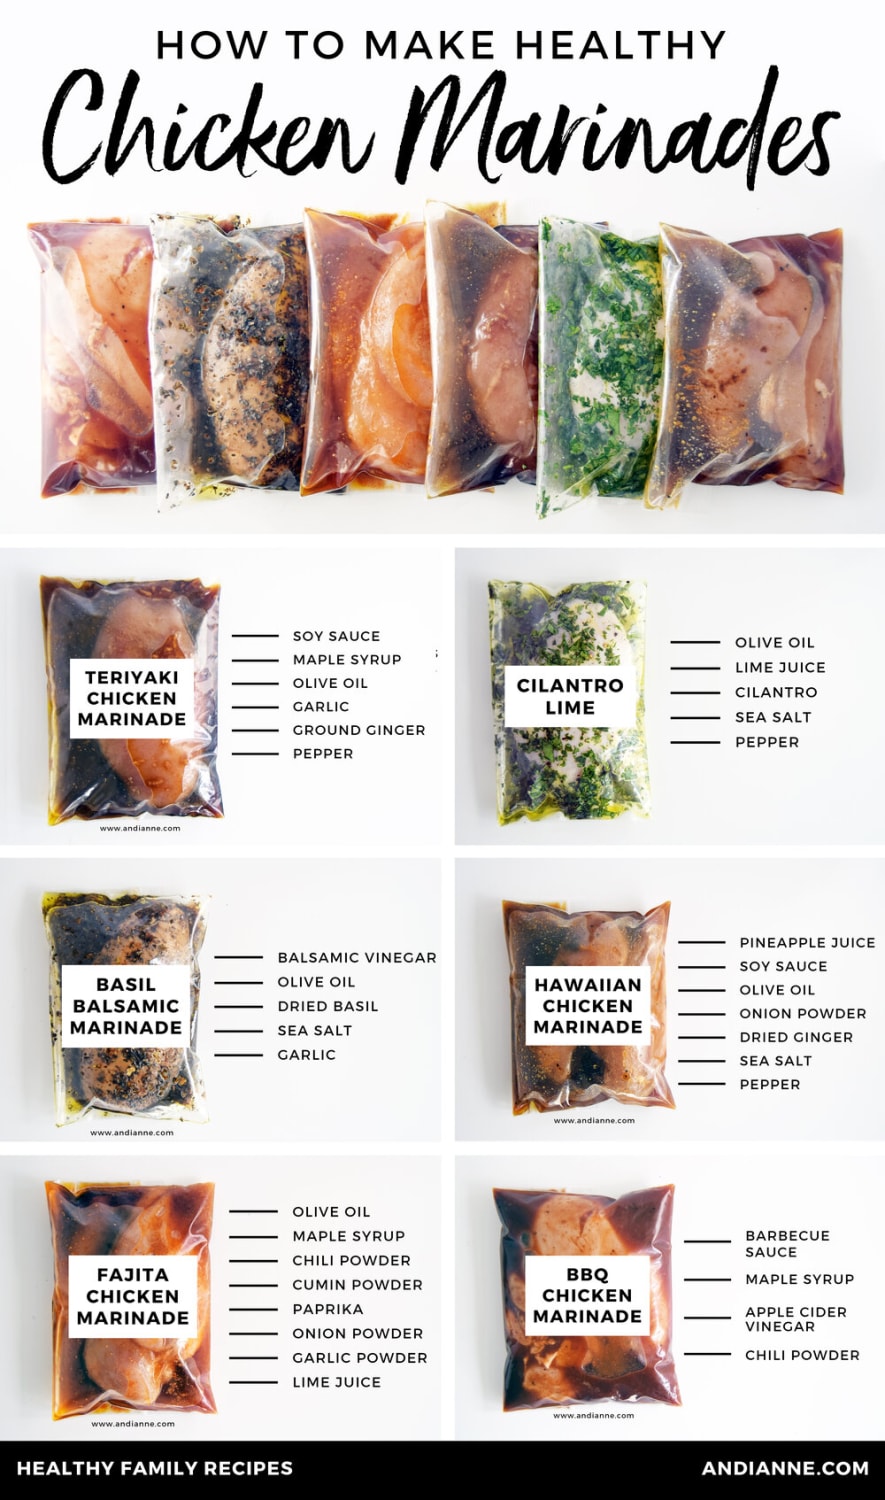 Six Healthy Chicken Marinade Recipes - Prep And Freeze For Later